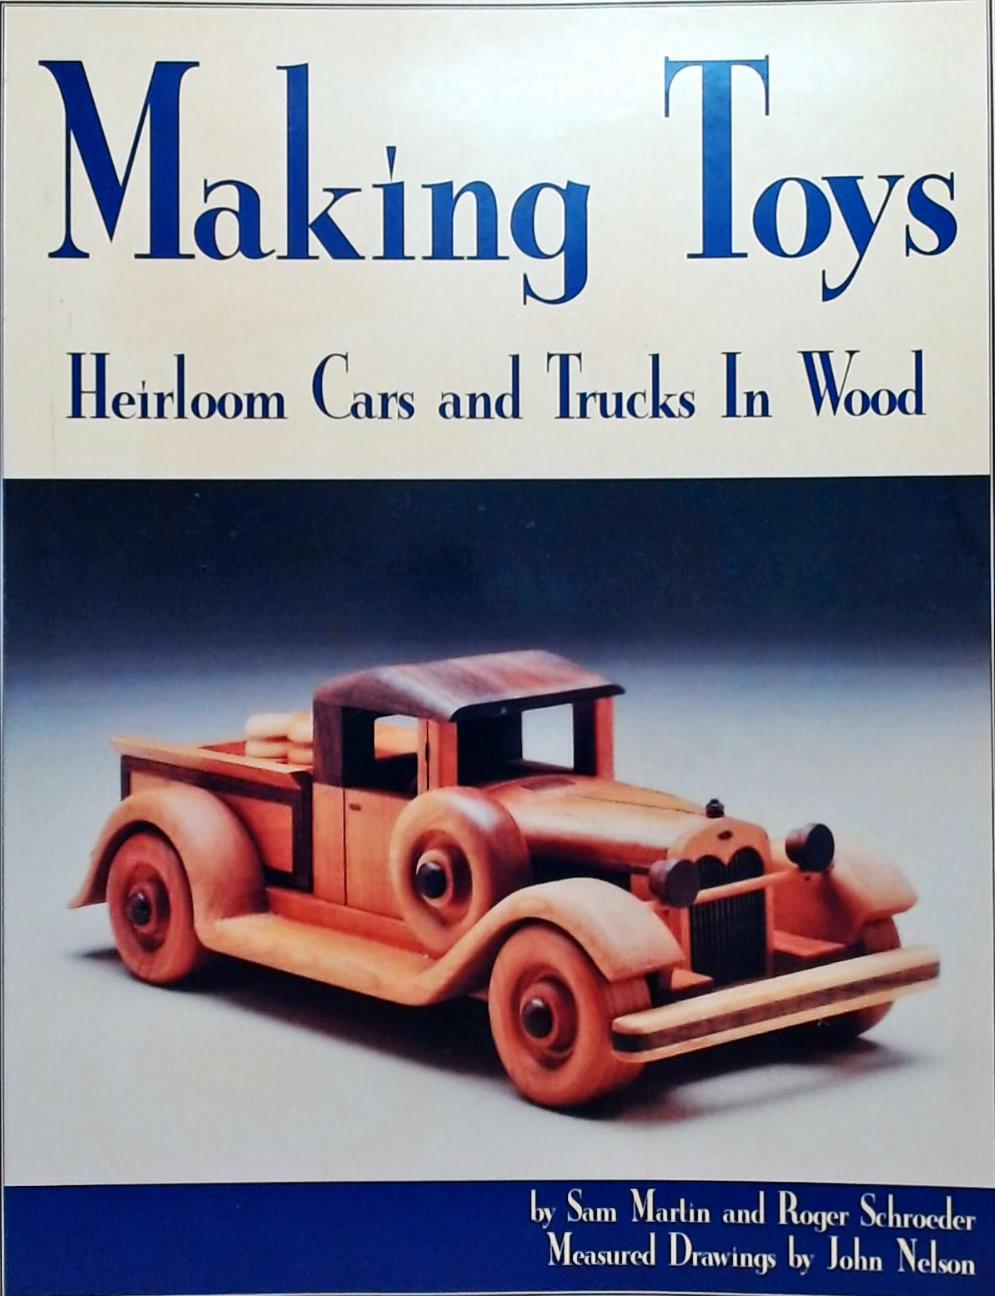 Making Toys - Heirloom Cars And Trucks In Wood